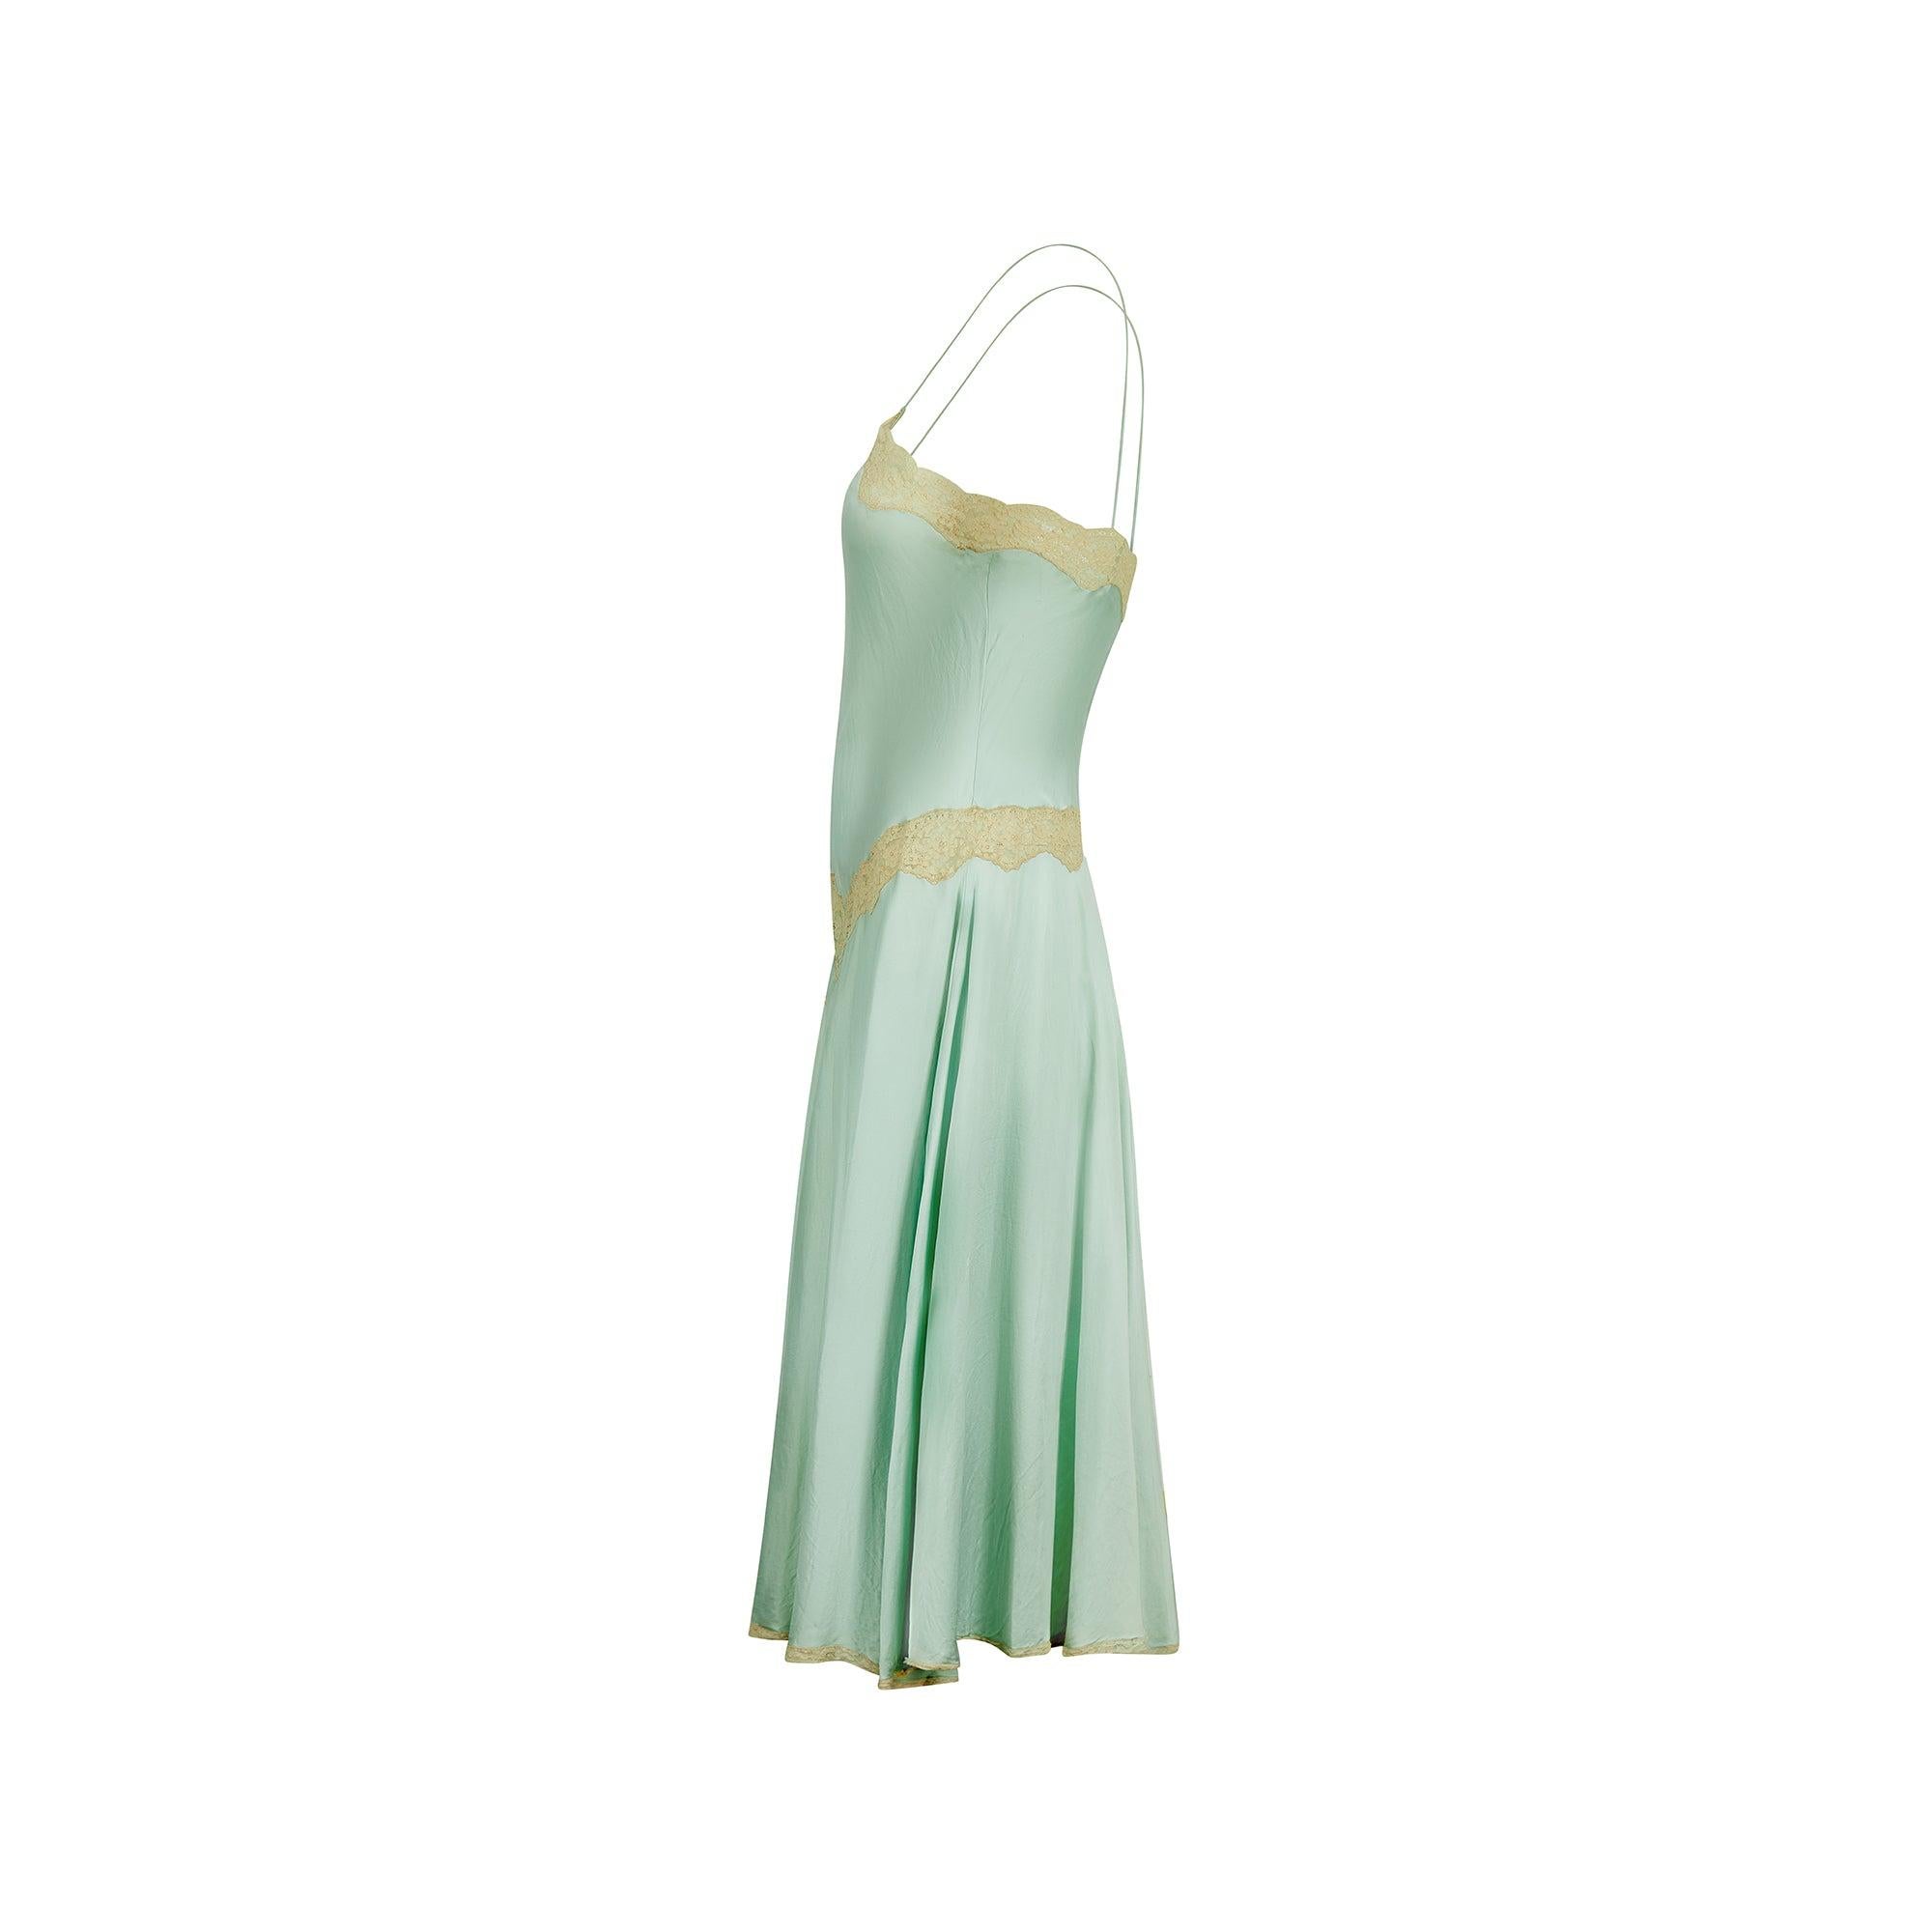 This elegant slip dress is cut from beautiful seafoam green silk and trimmed with pale off-white lace. Created by luxury lingerie label Jenny Dobell in the 1980s, it draws on classic 1920s’ silhouettes. The flared skirt kicks out as the wearer moves